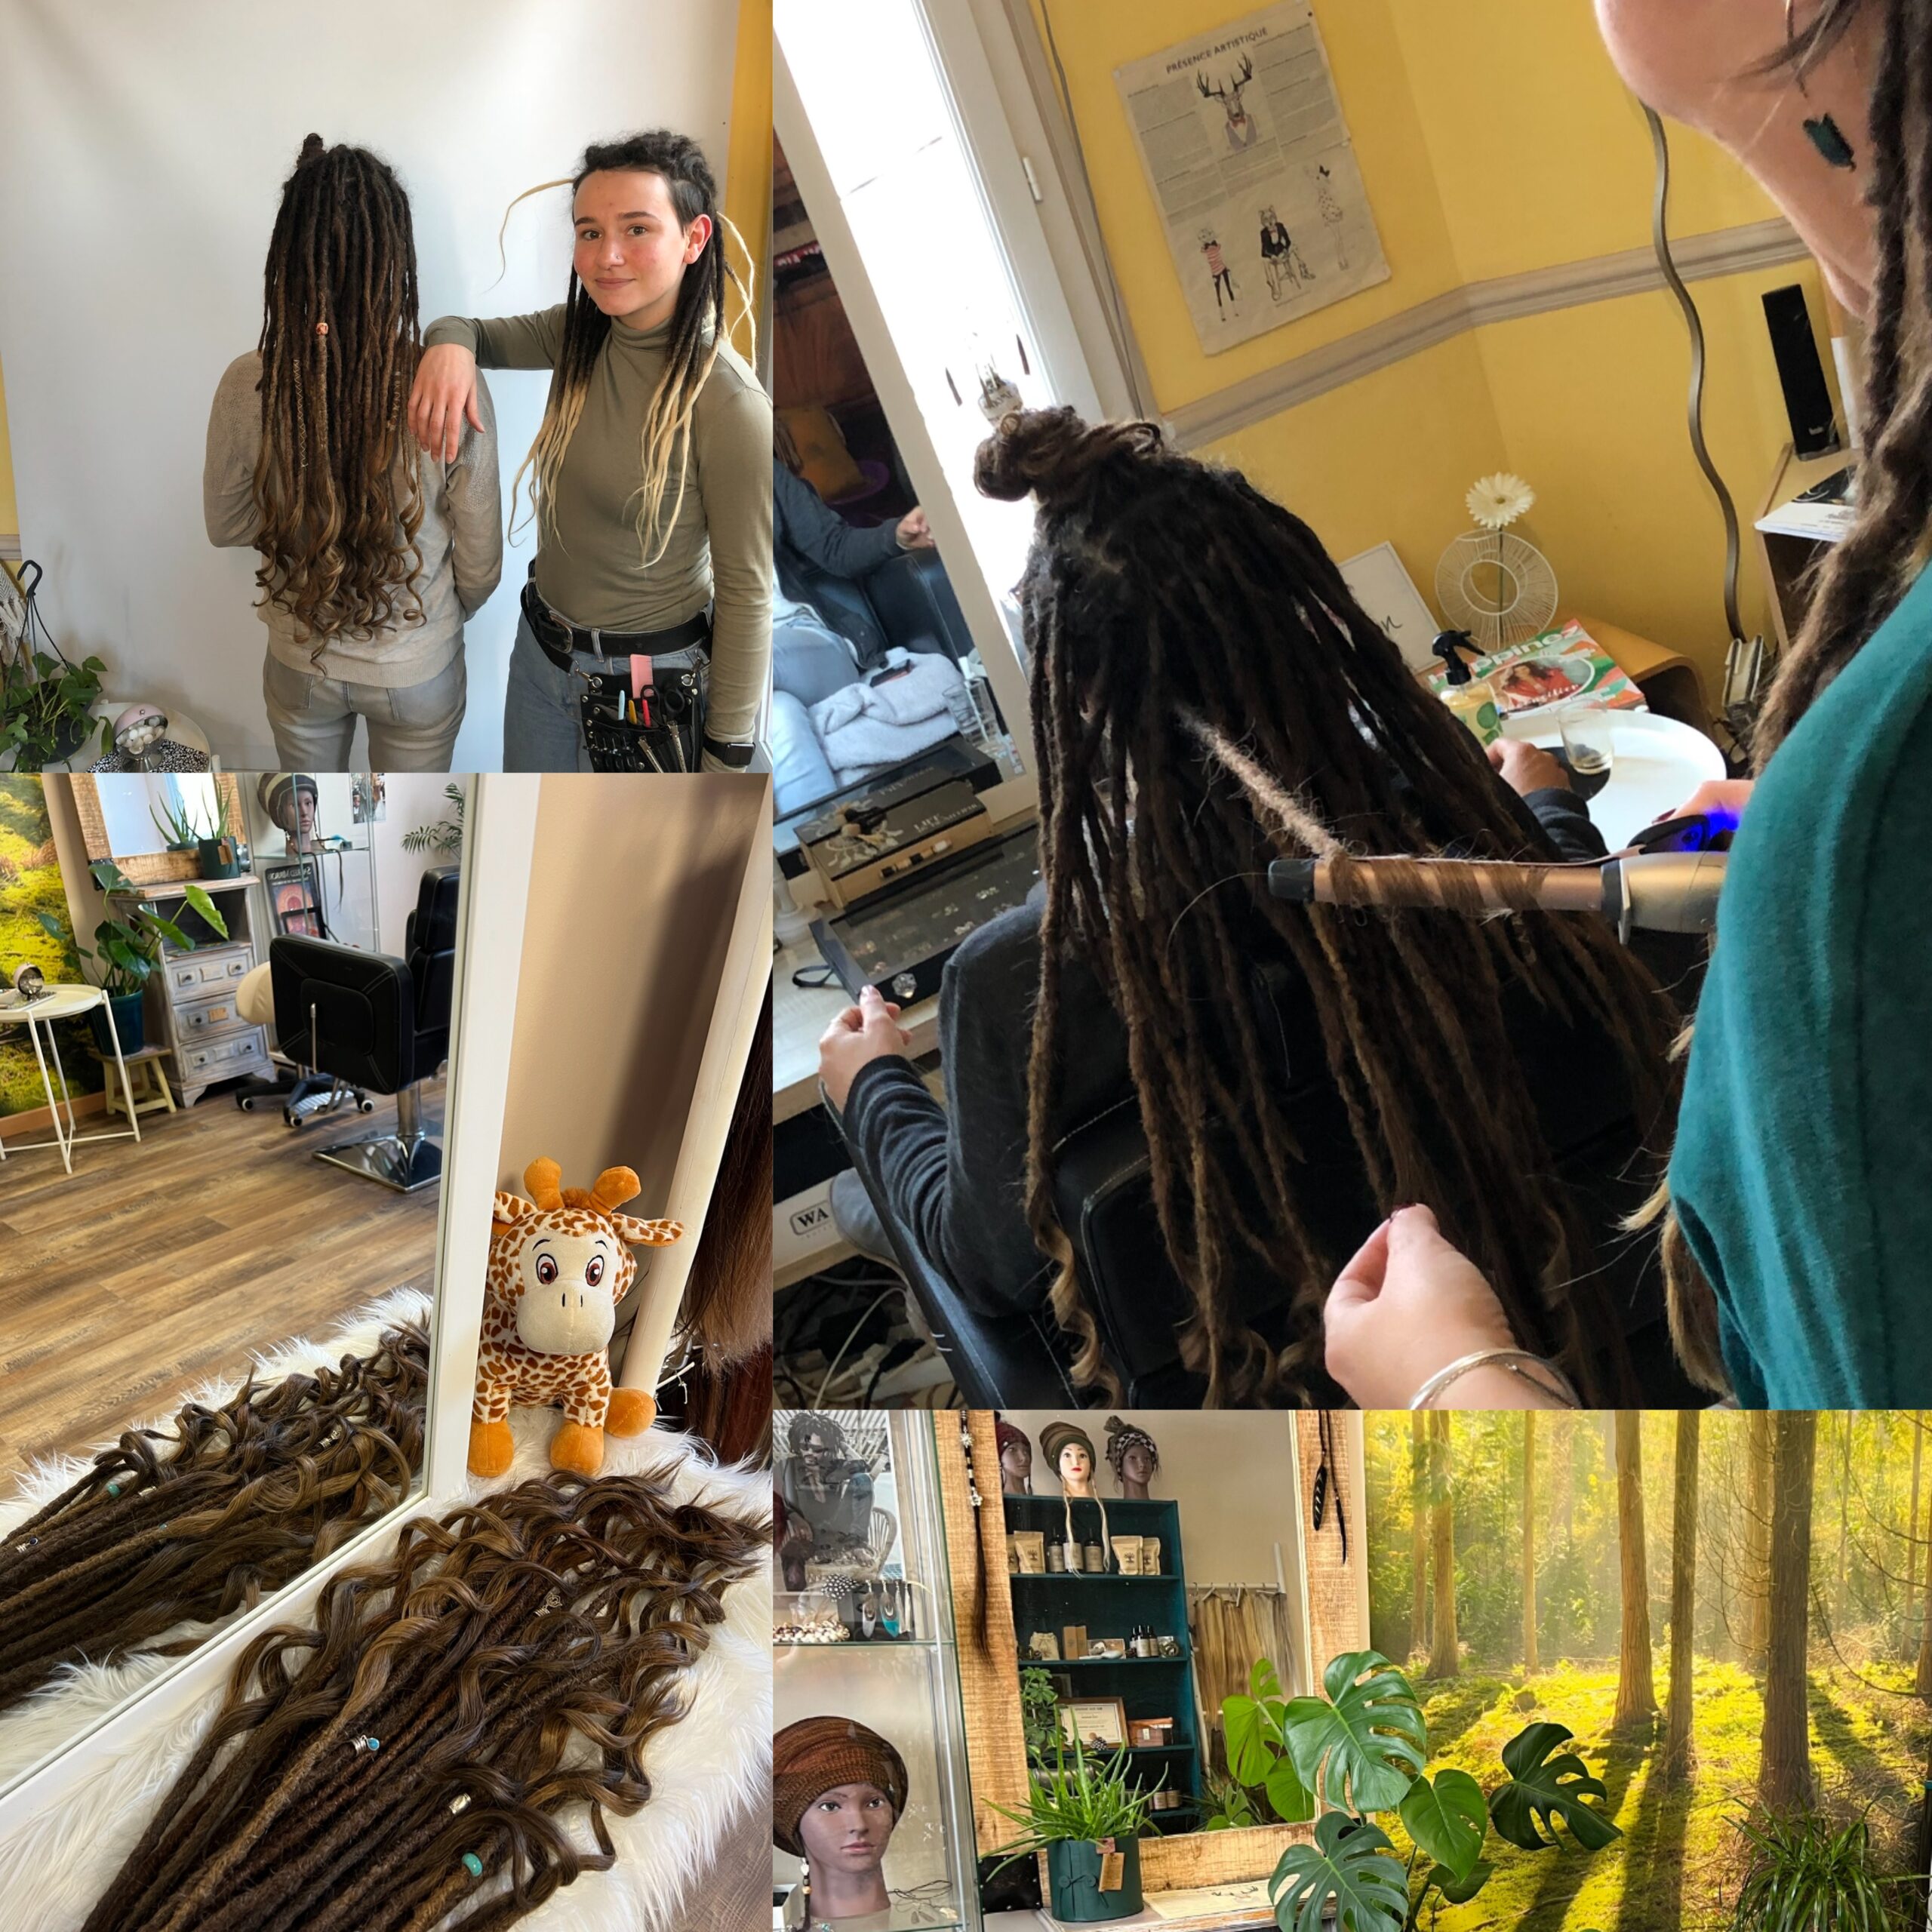 How to choose quality hair to make beautiful natural dreadlocks. Learn how to create natural dreads. Loctician training.